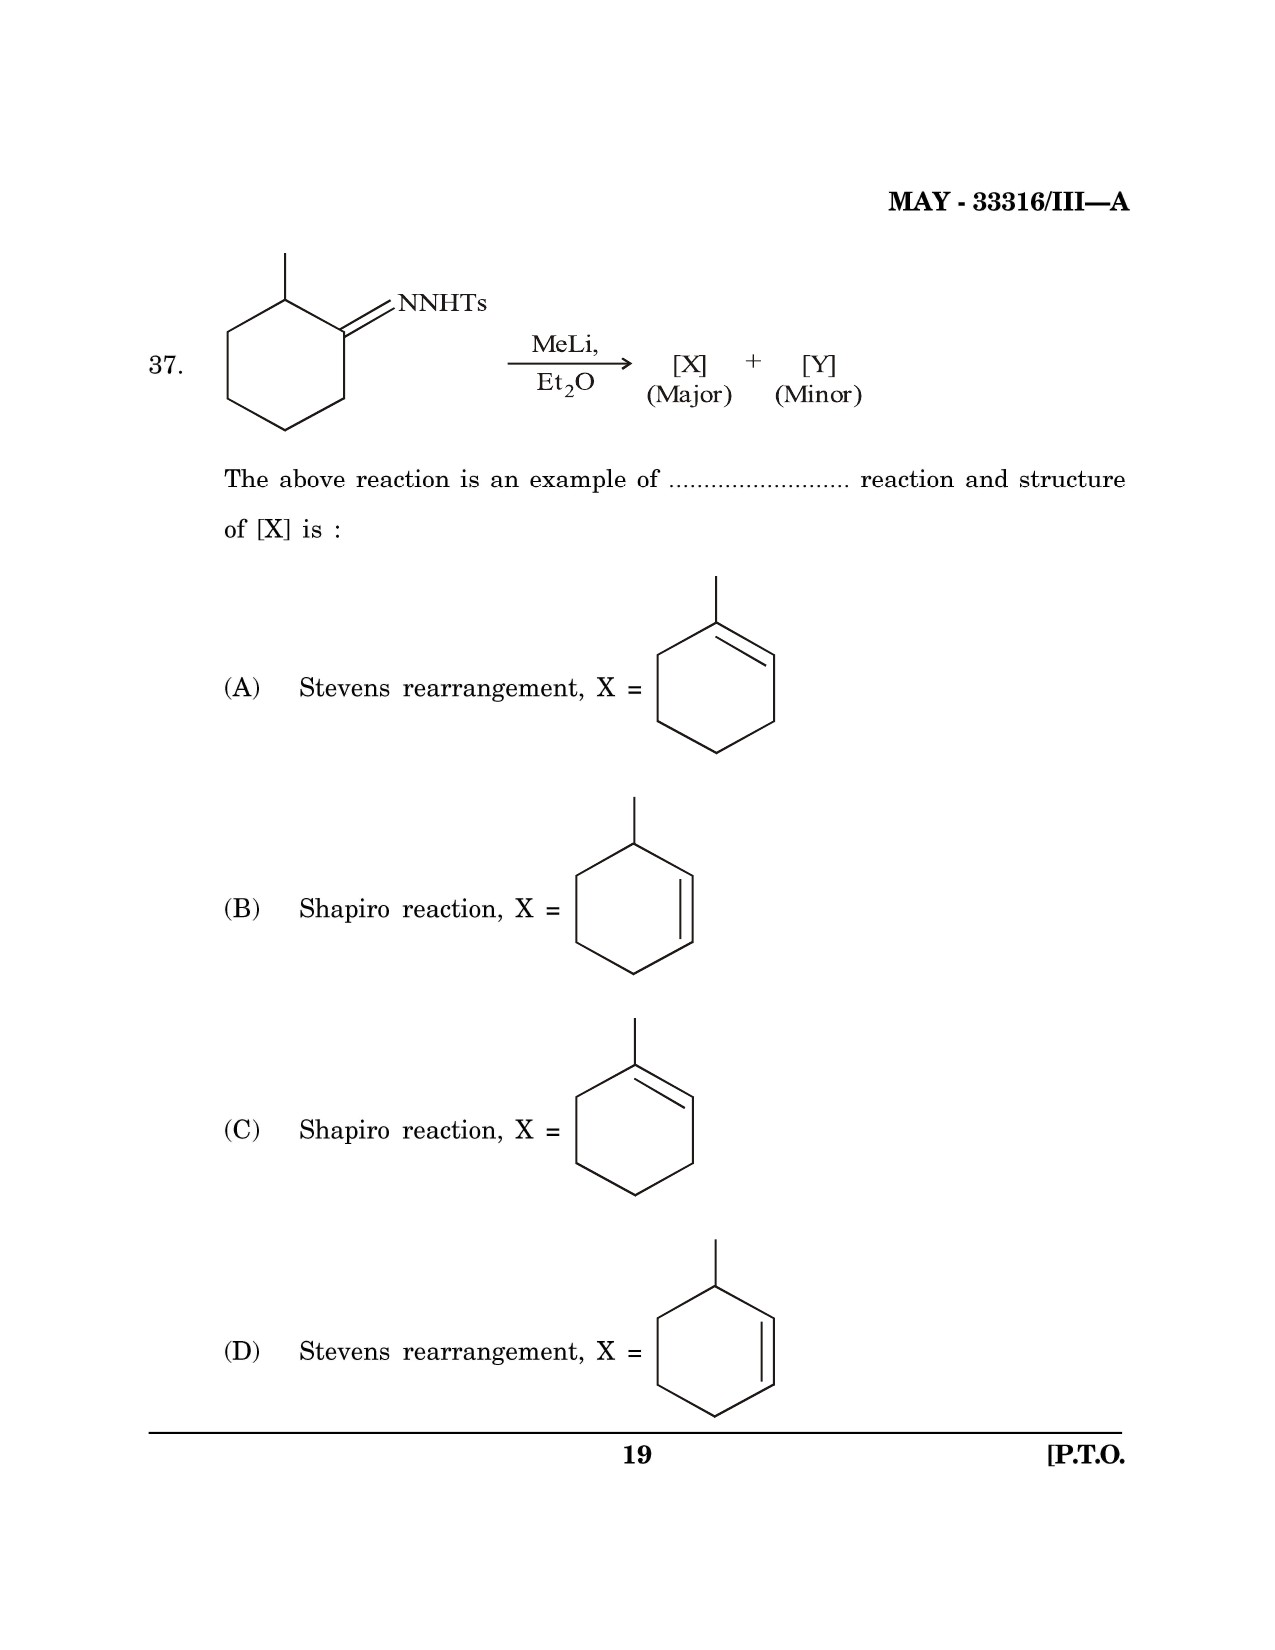 Maharashtra SET Chemical Sciences Question Paper III May 2016 18